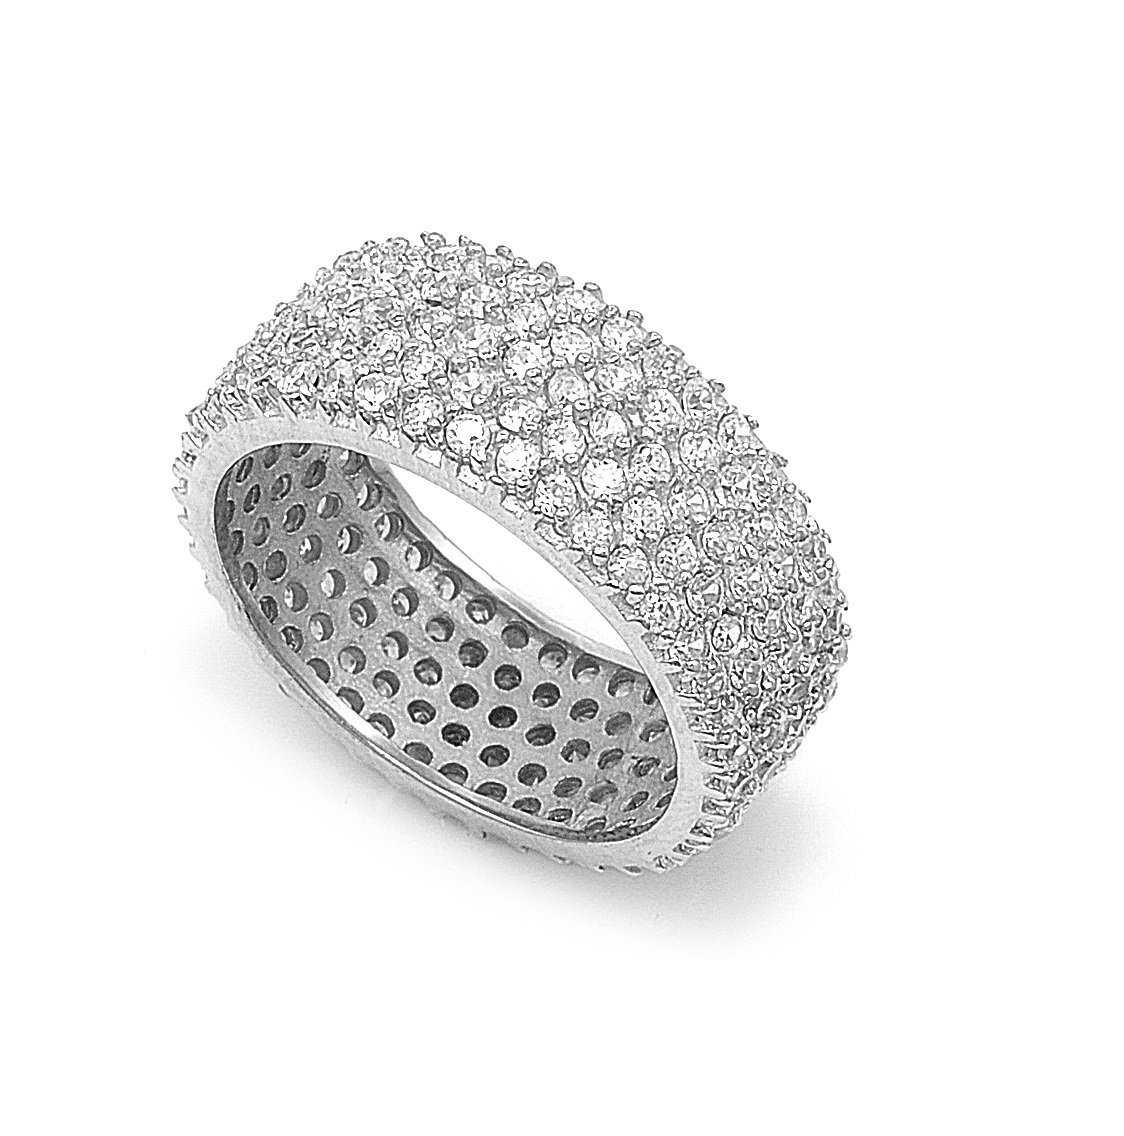 AllinStock Eternity Pave Cubic Zirconia Ring Sterling Silver 925 